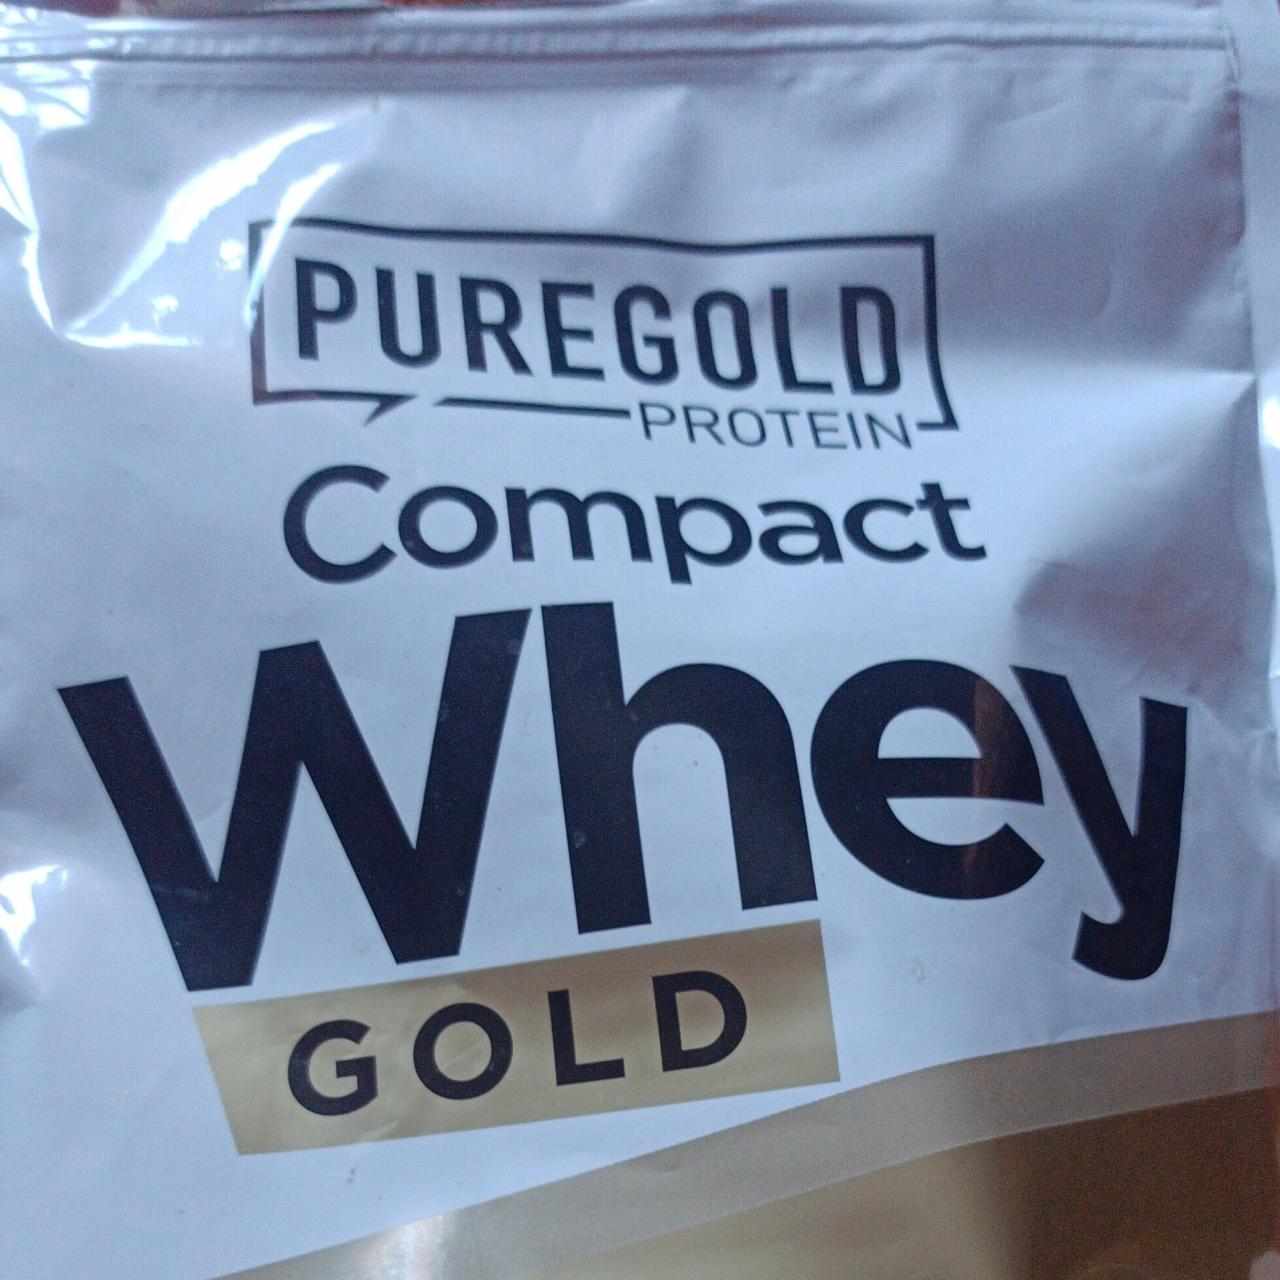 Fotografie - Compact whey gold Puregold protein